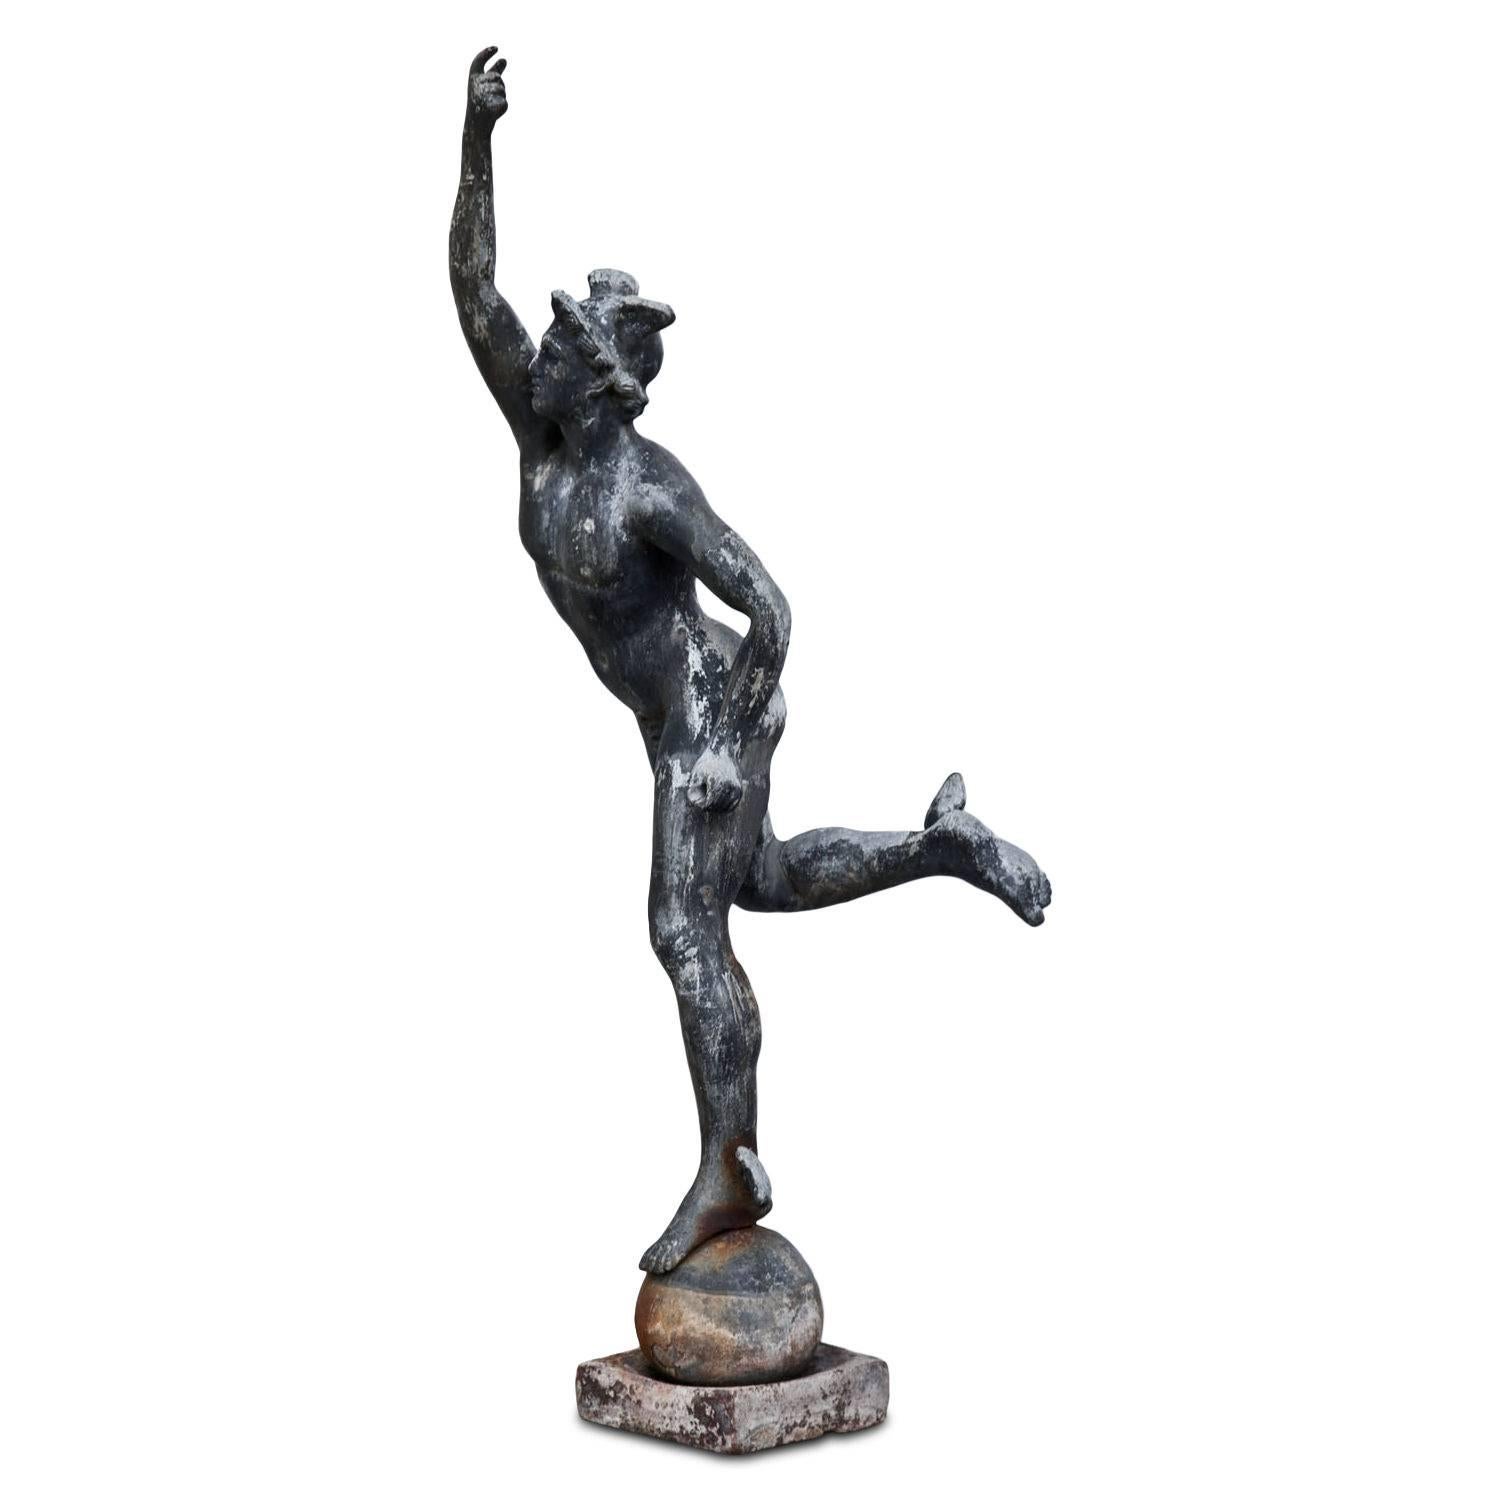 Large lead figure of the famous Hermes after Giambologna, of the 19th century. Hermes stands on a sphere with a square base and reaches out with his right hand. The lead figure has a beautiful natural patina; the Rod of Asclepius is missing.